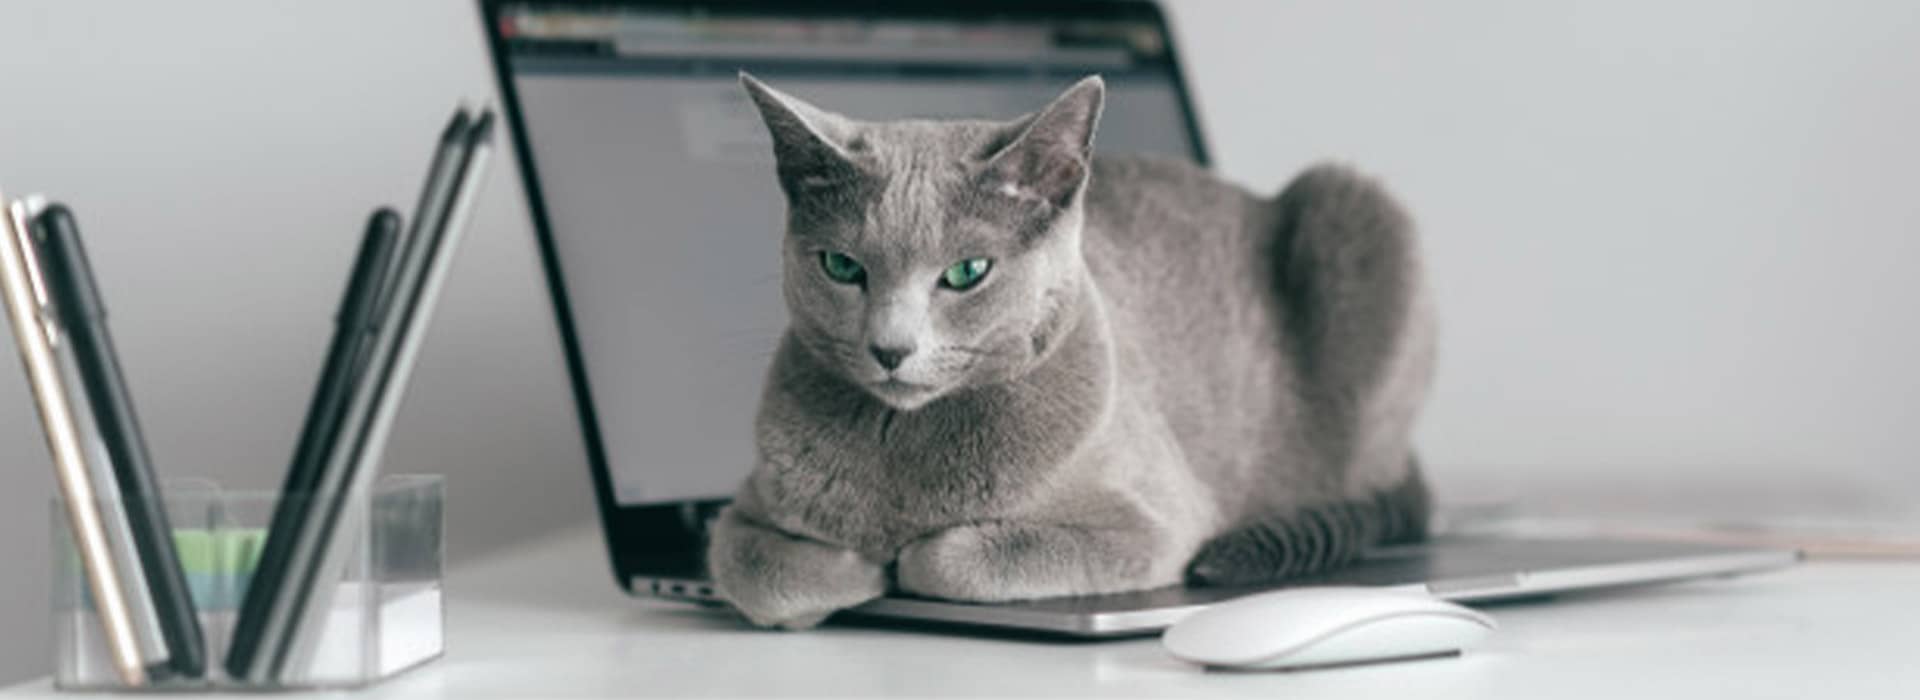 A picture of a cat sitting on a computer 